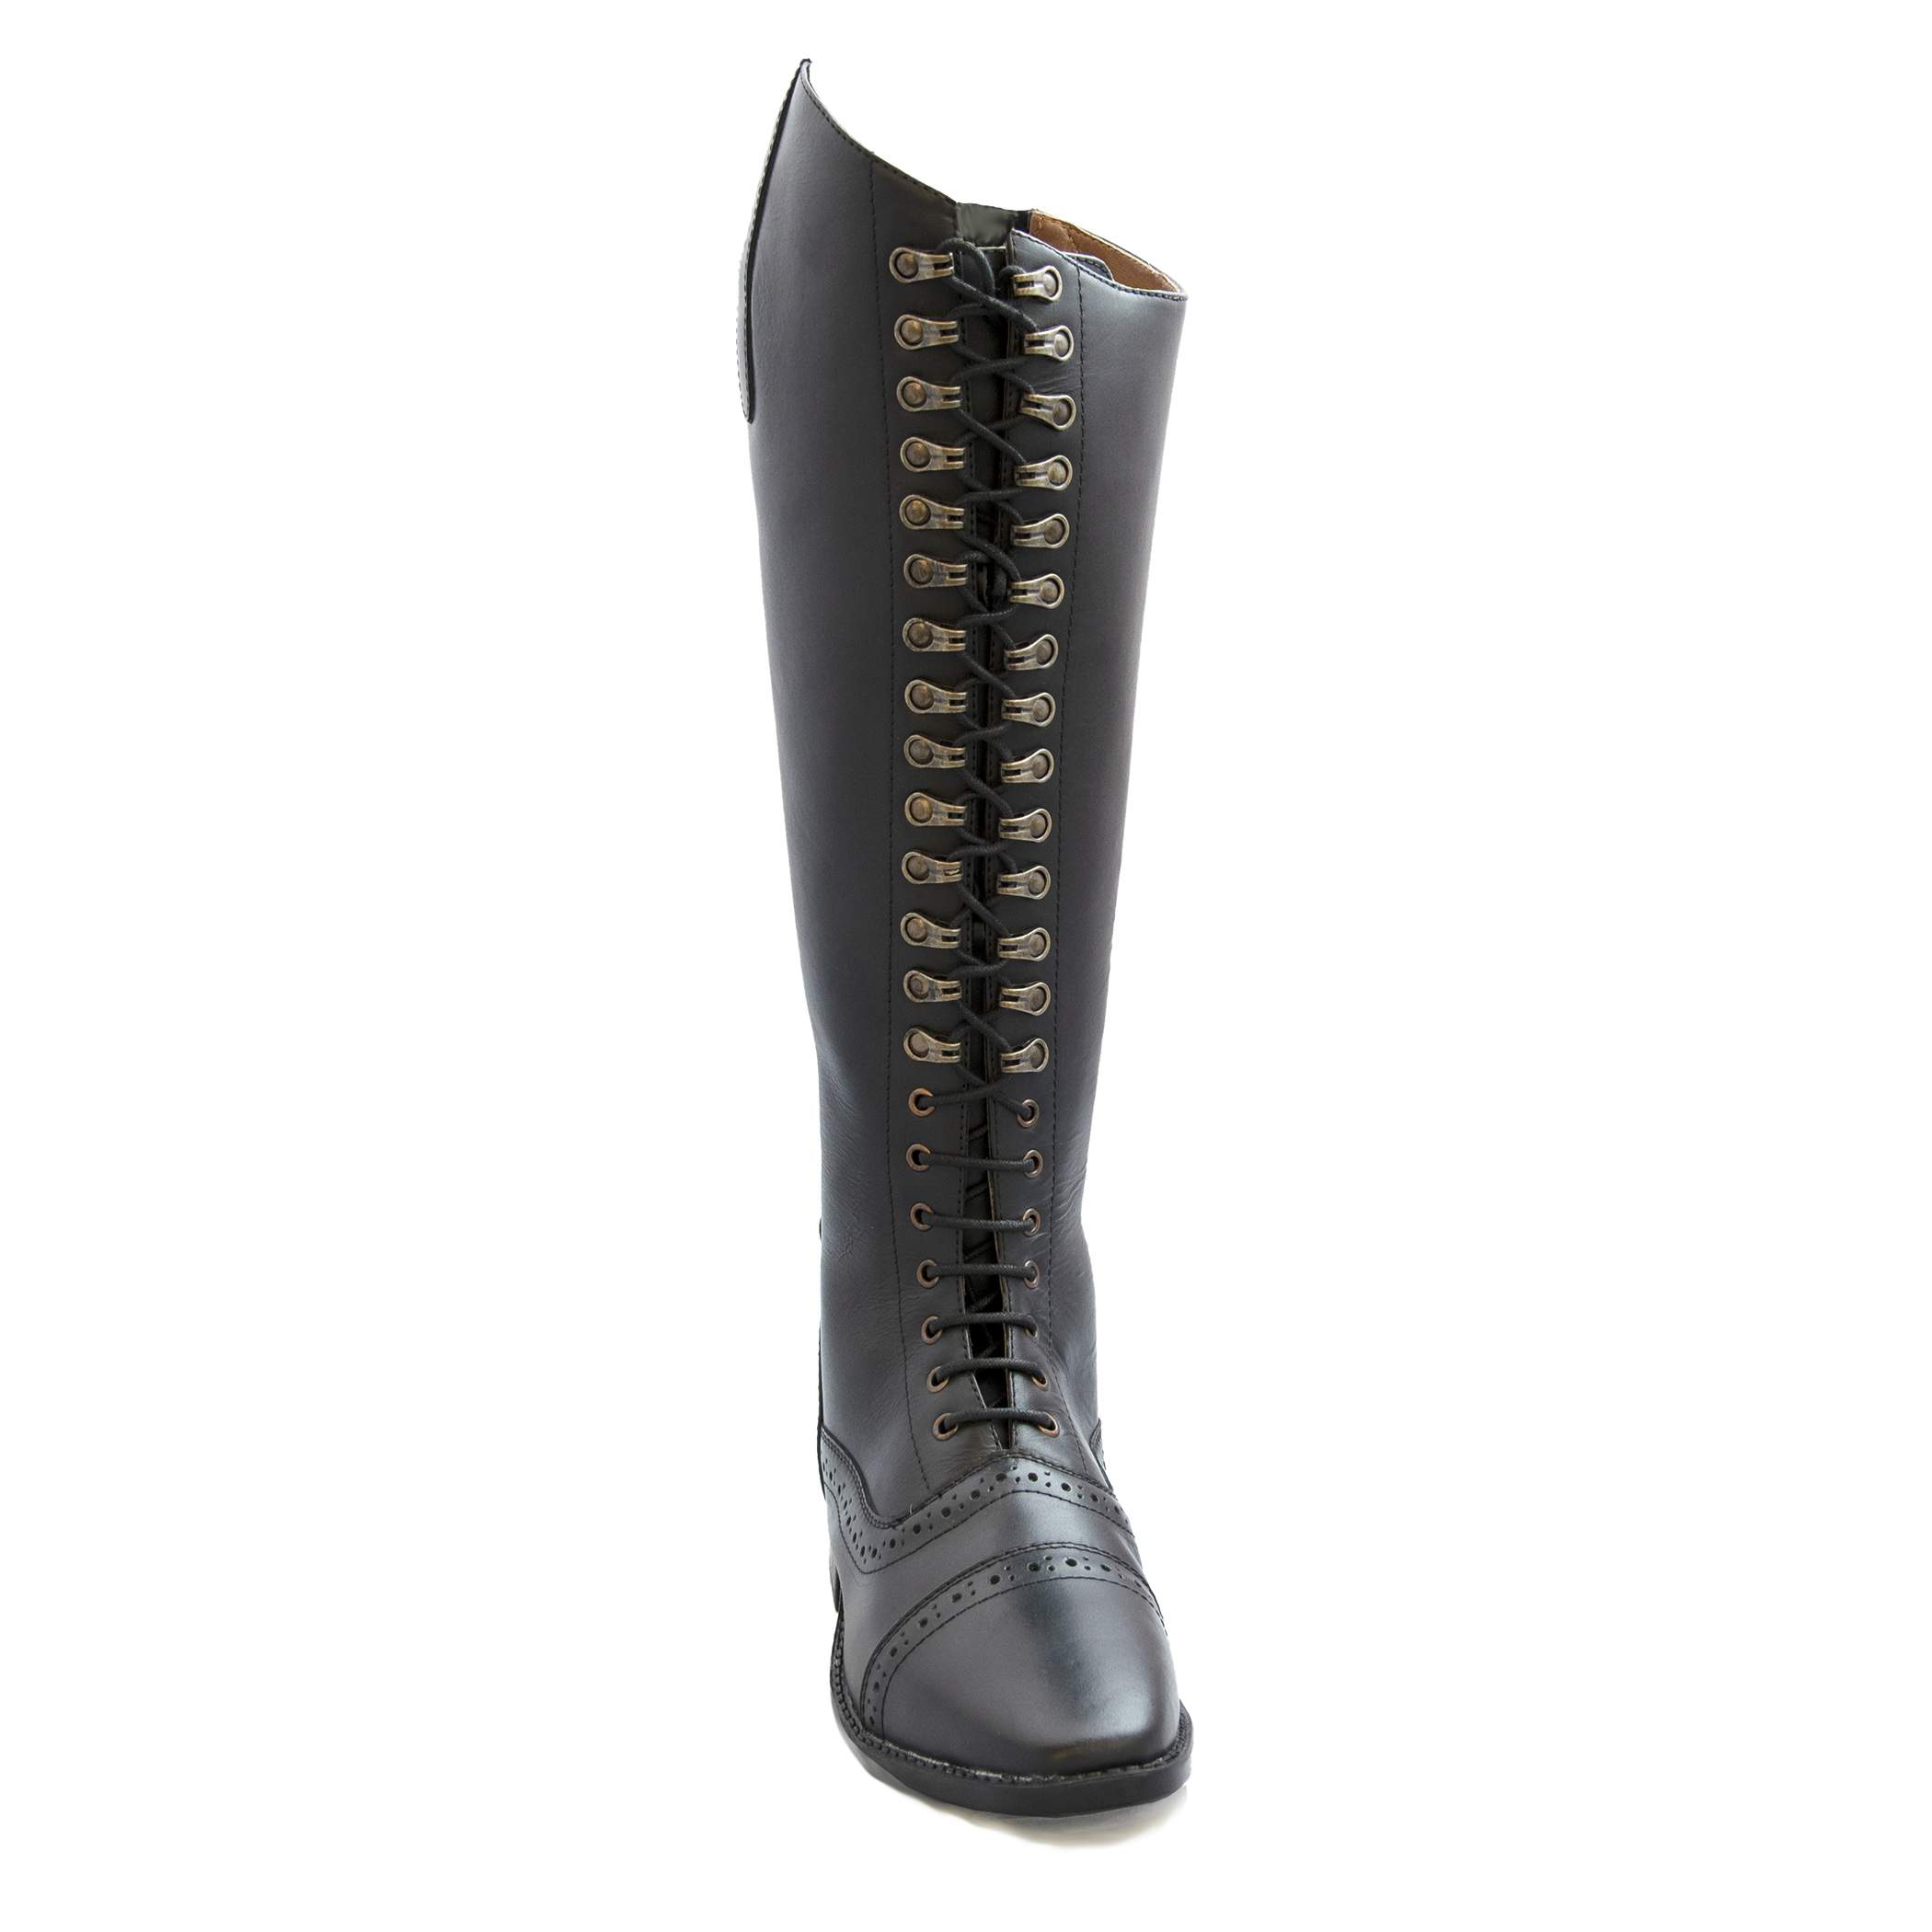 SALE £150 Pippin Lace Up Dressage Boot NEW STYLE